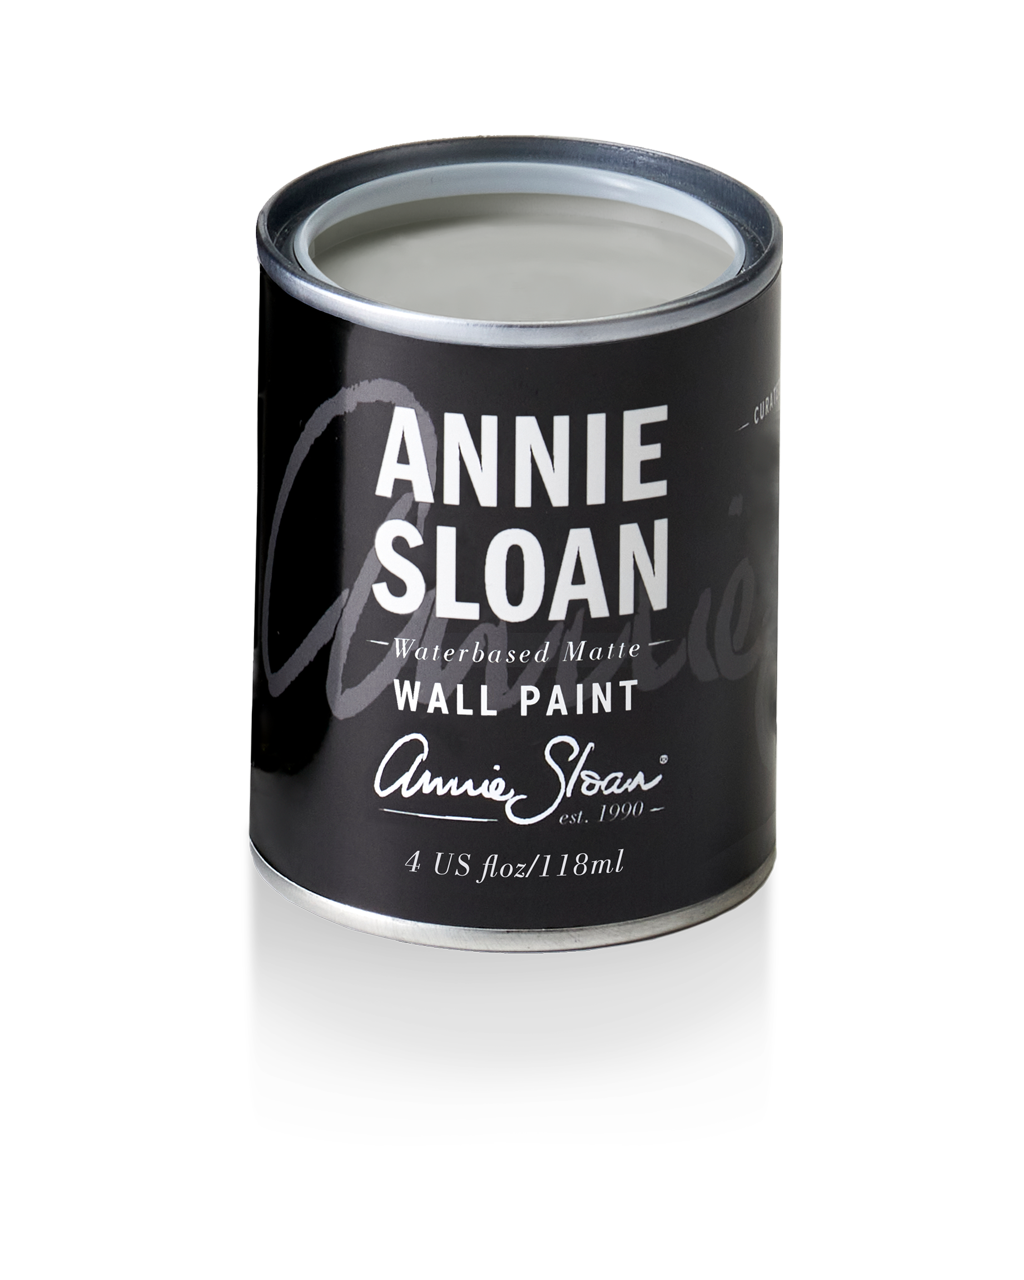 Annie Sloan Wall Paint - Chicago Gray